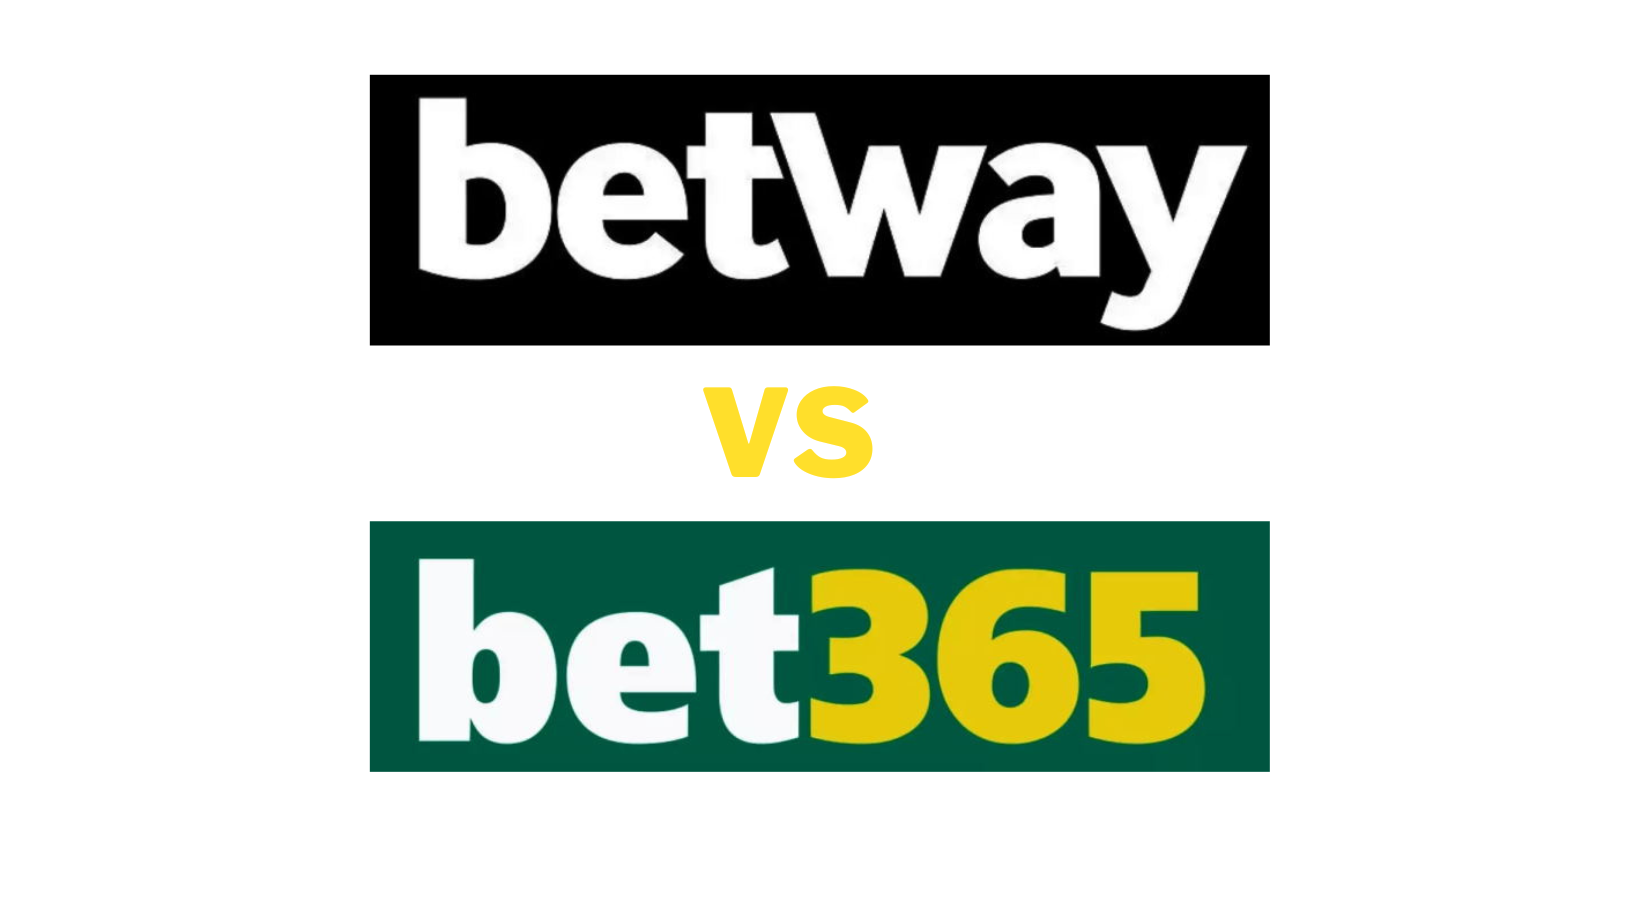 Game On: The Betway vs Bet365 Battle for Betting Supremacy